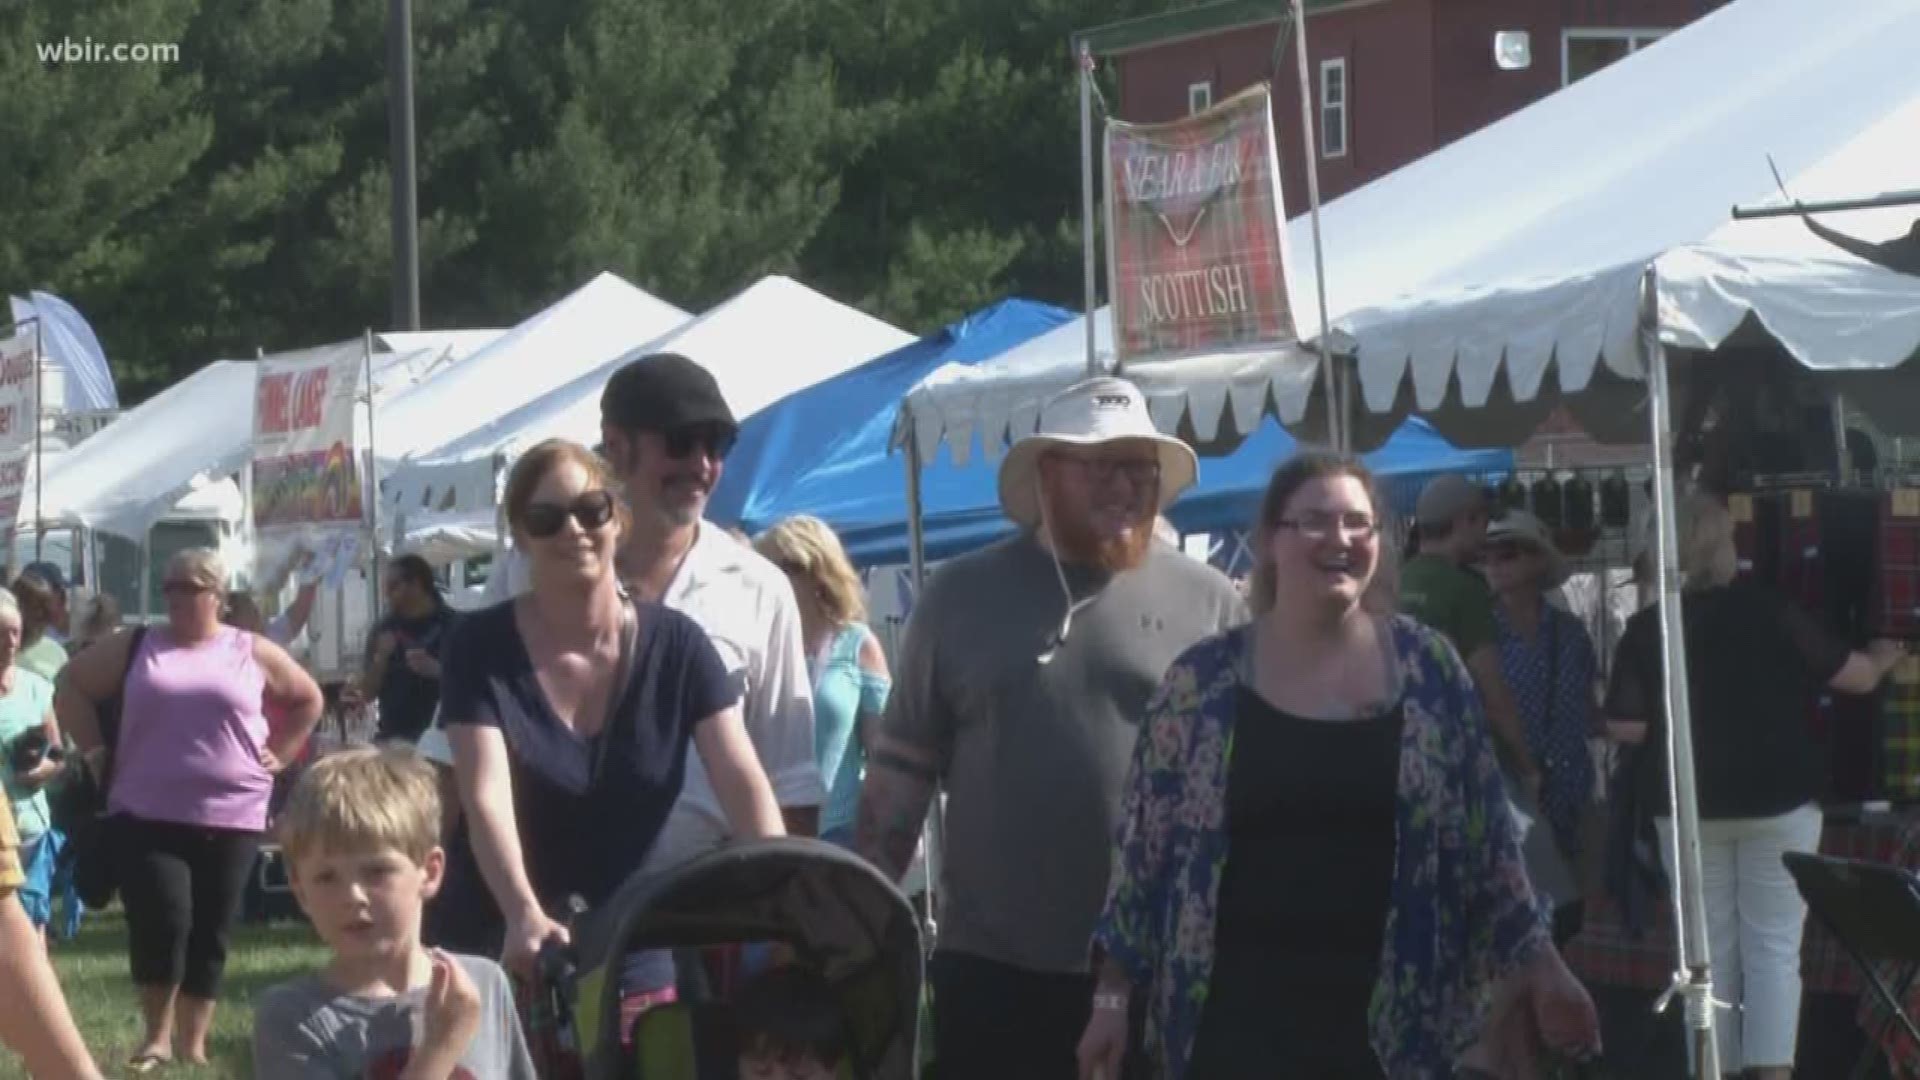 Hundreds of people celebrated Scottish heritage in East Tennessee at the Smoky Mountain Scottish Festival on Saturday.